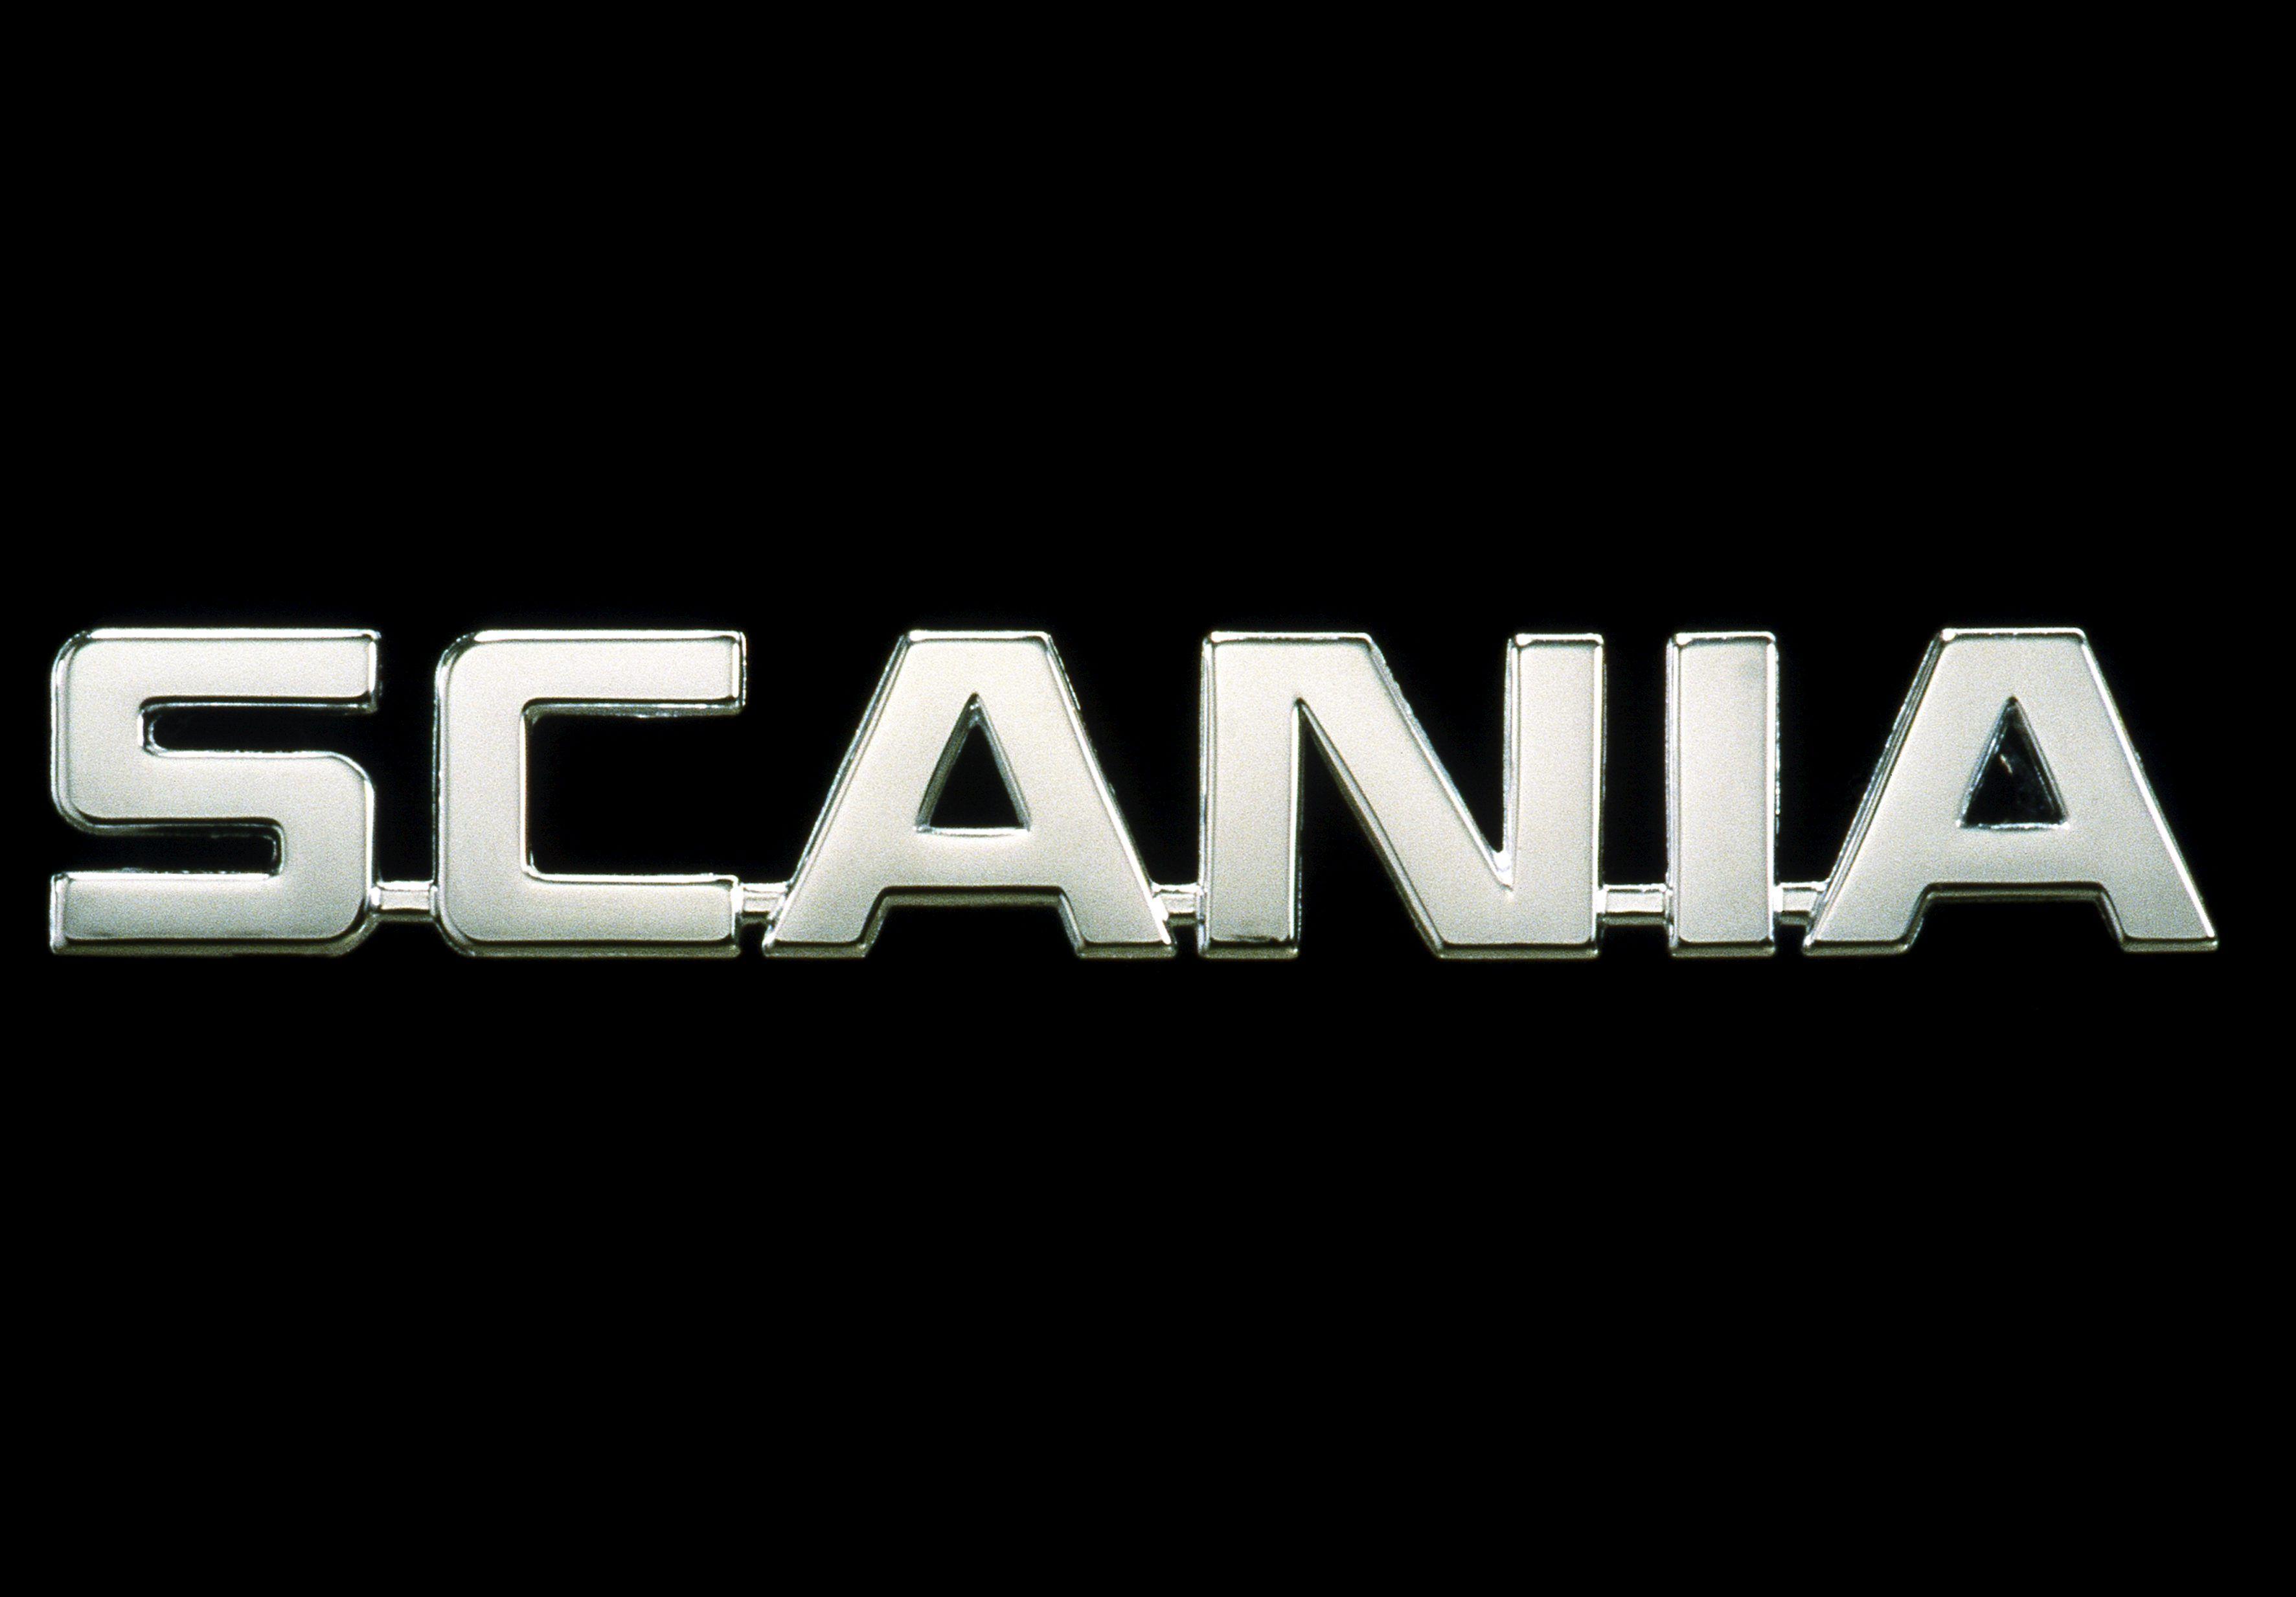 Scania watches over its trademark